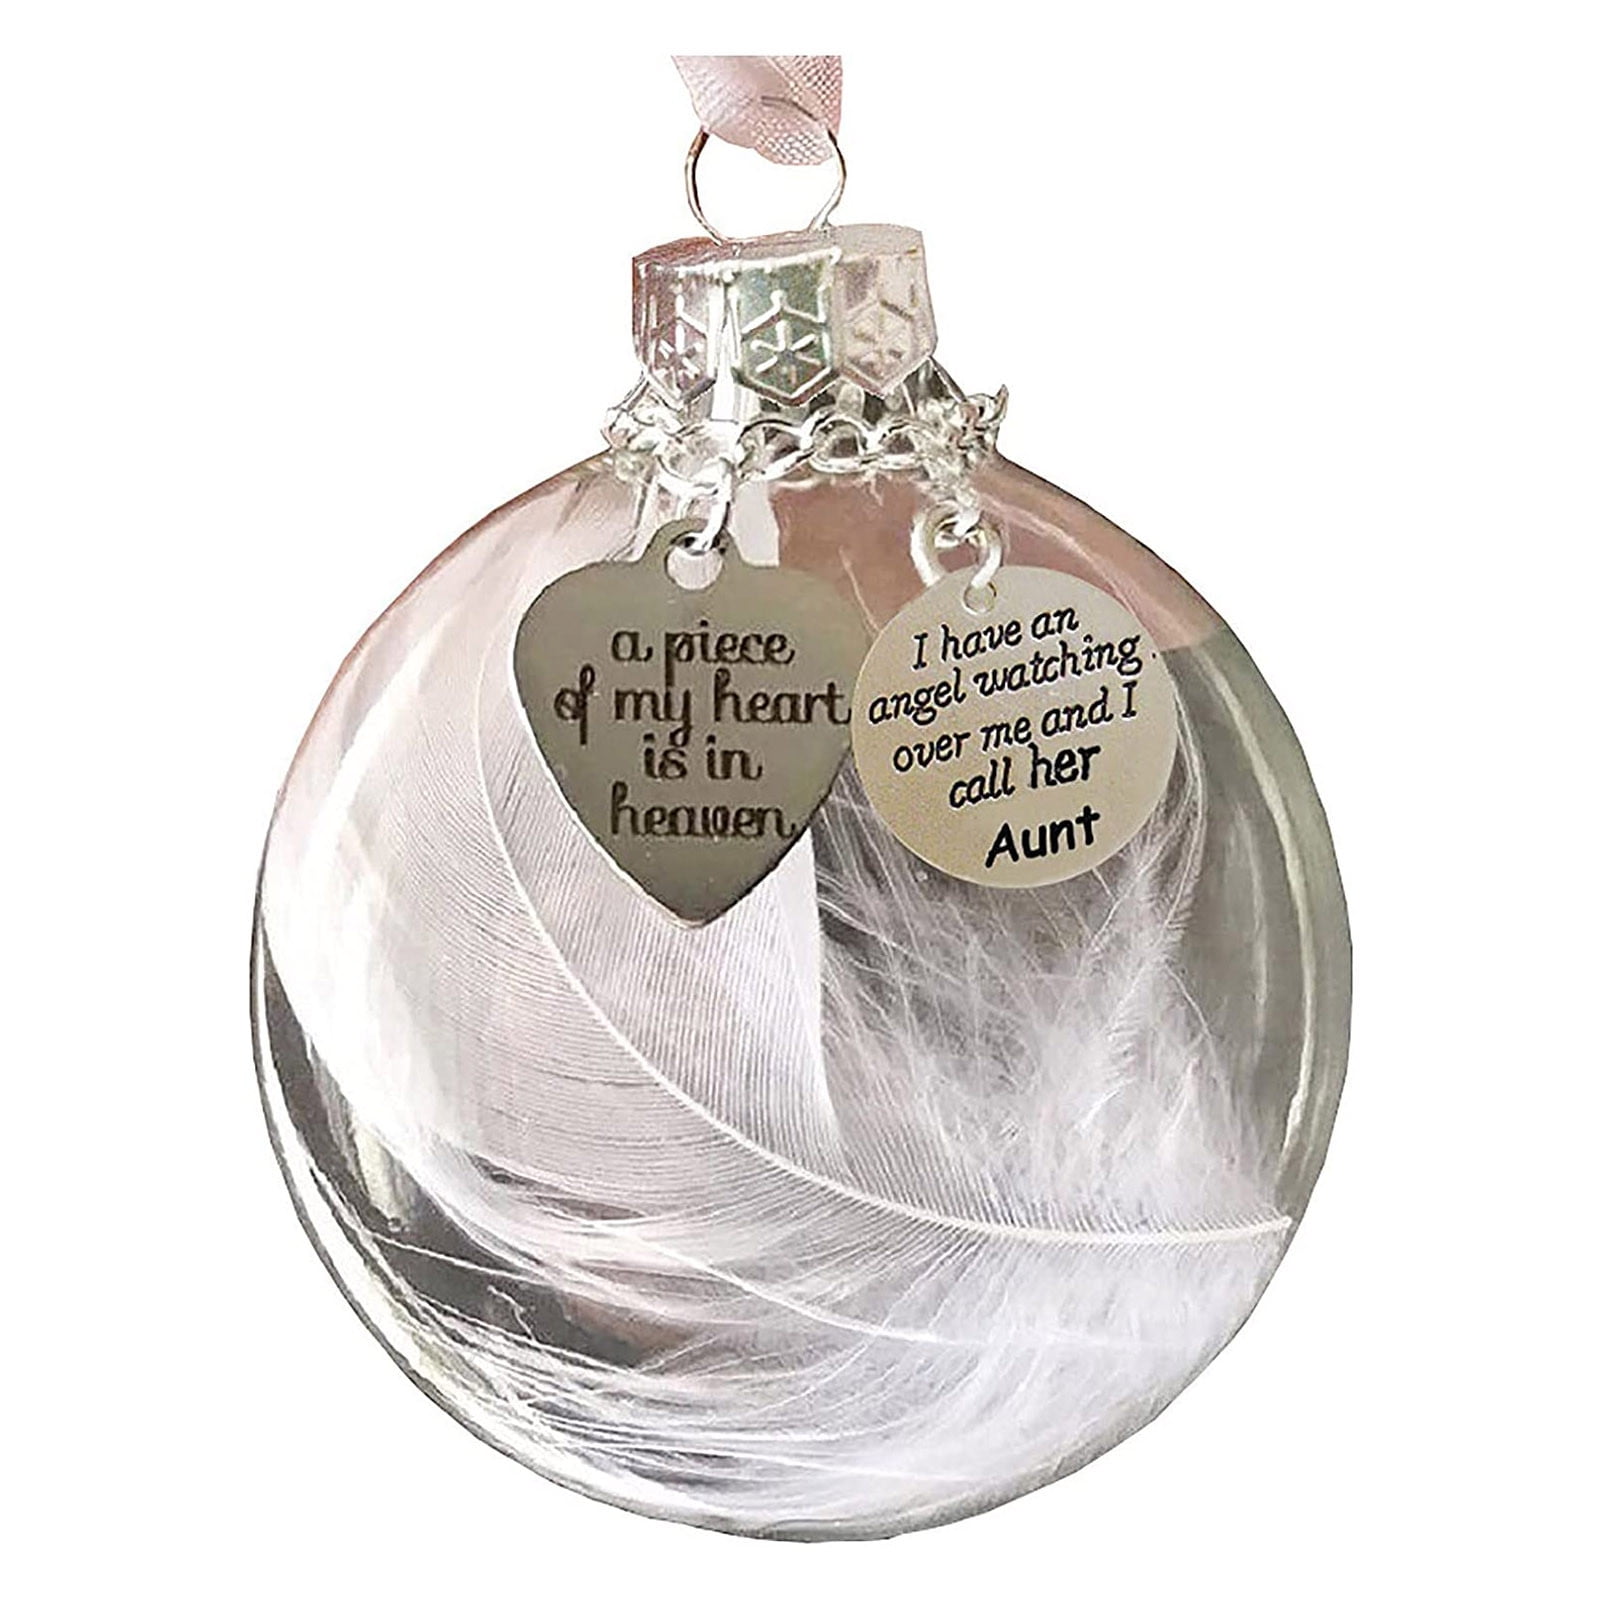 Christmas 3 X George Michael Heart Glass Bauble Decoration With Feather